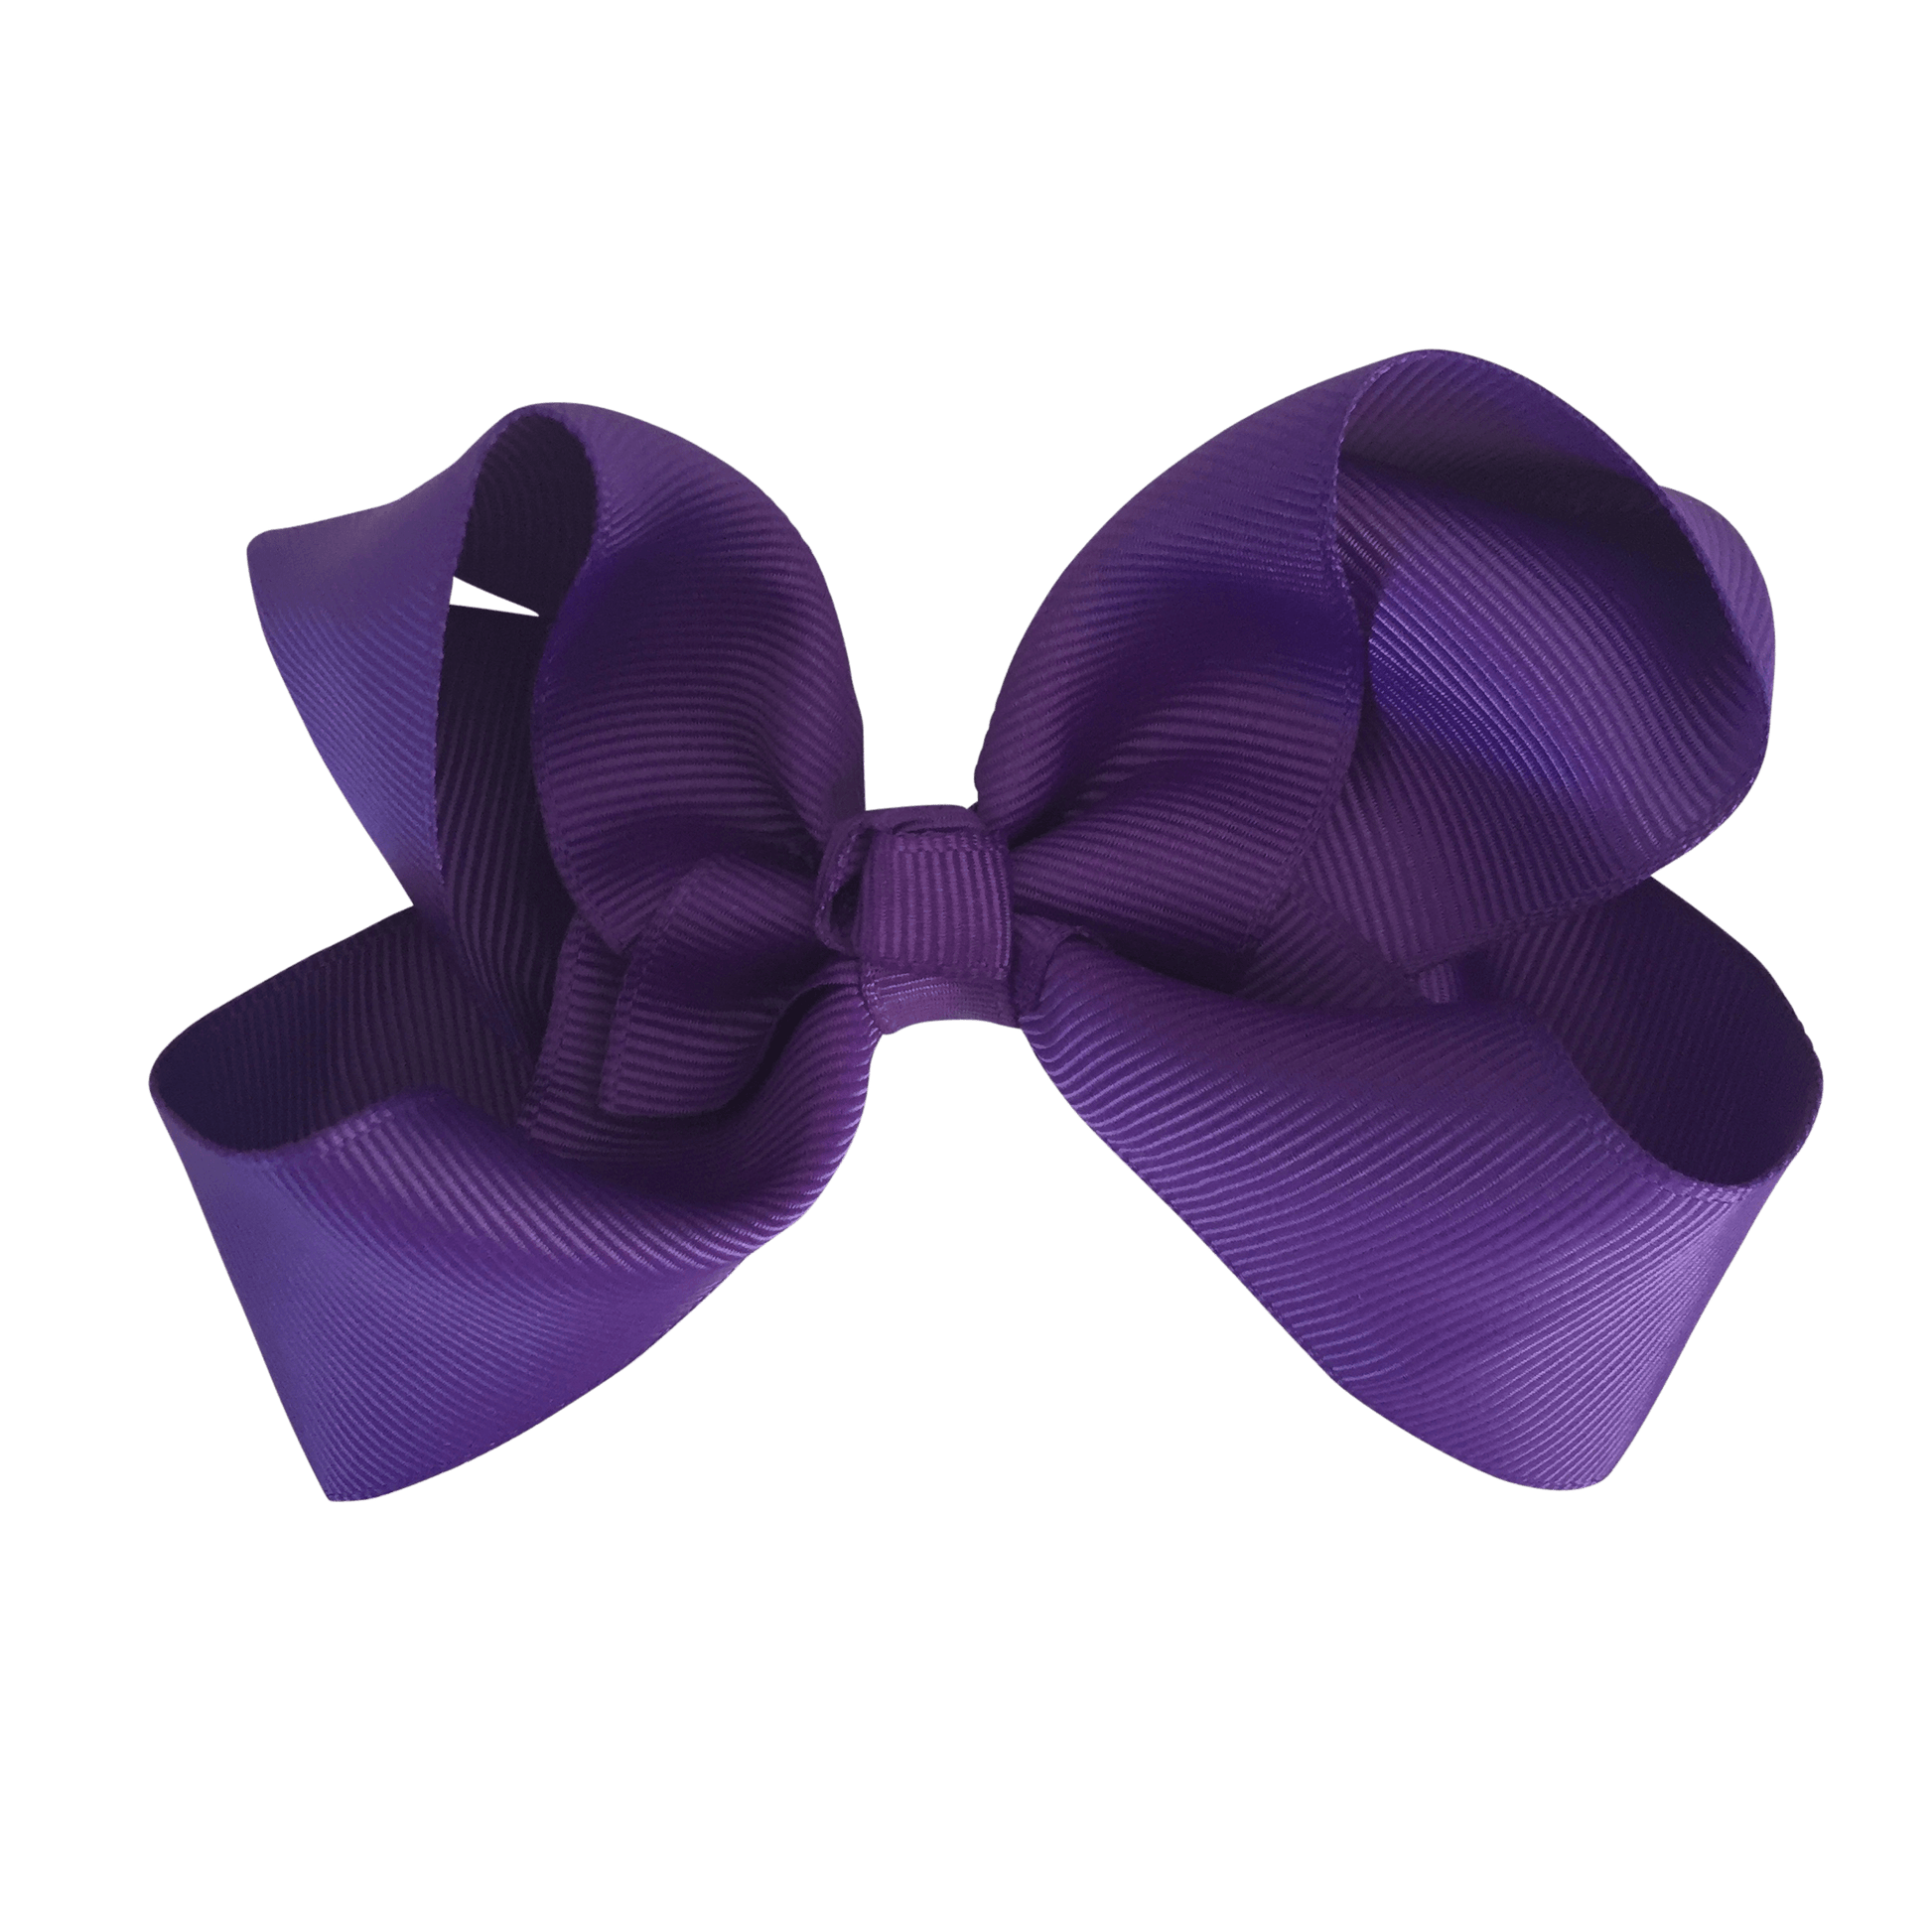 Birthday (Age) Big Bow - Hair clips - School Uniform Hair Accessories - Ponytails and Fairytales